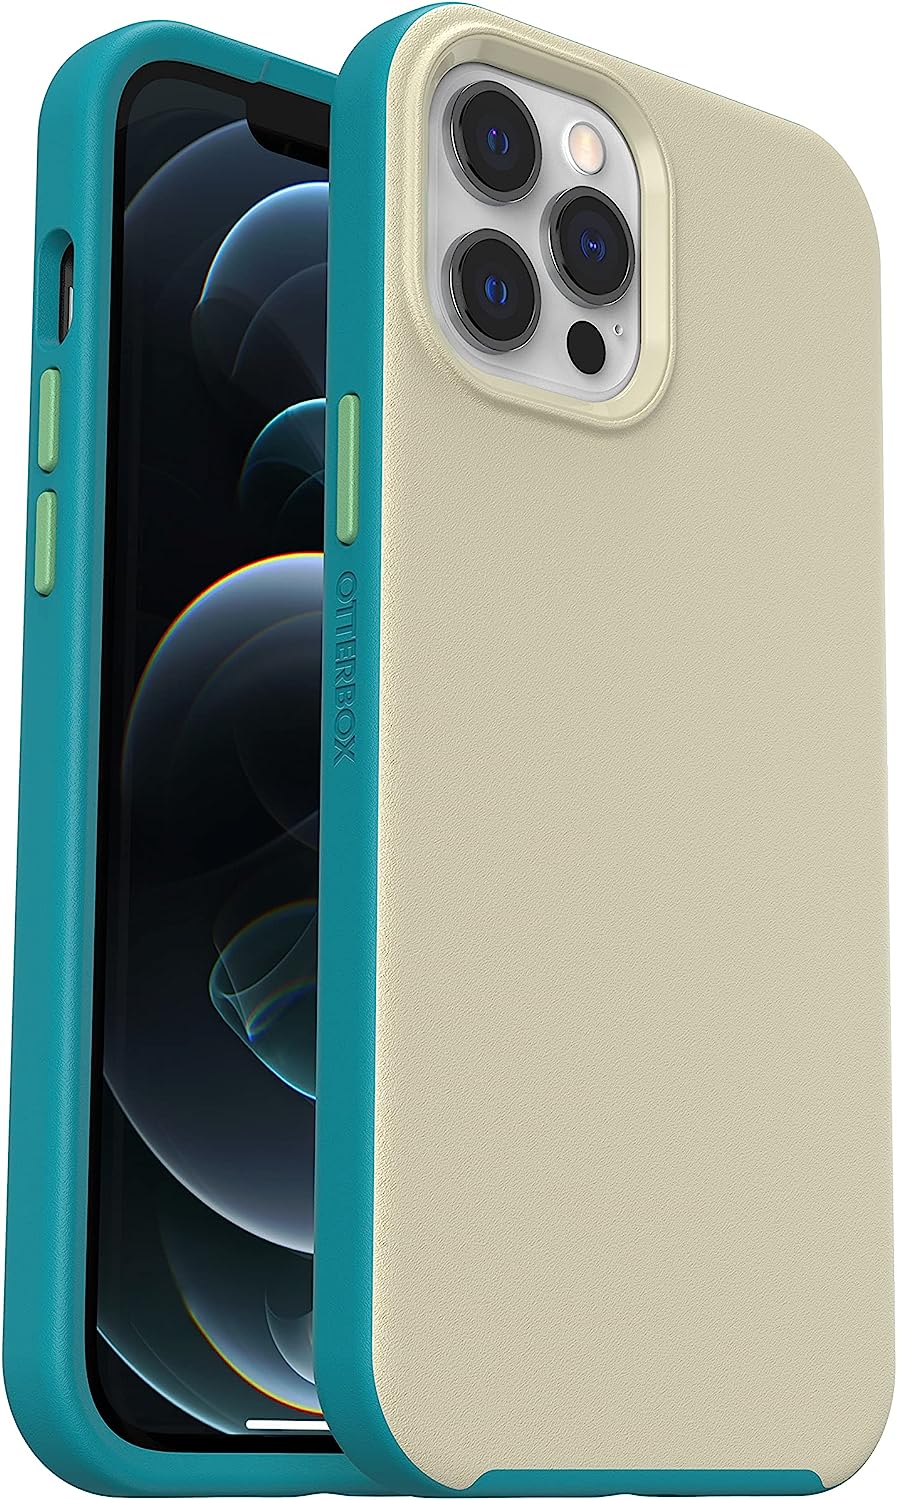 OtterBox Slim Series Case for iPhone 12 Pro Grey/Green RRP 29.99 CLEARANCE XL 24.99